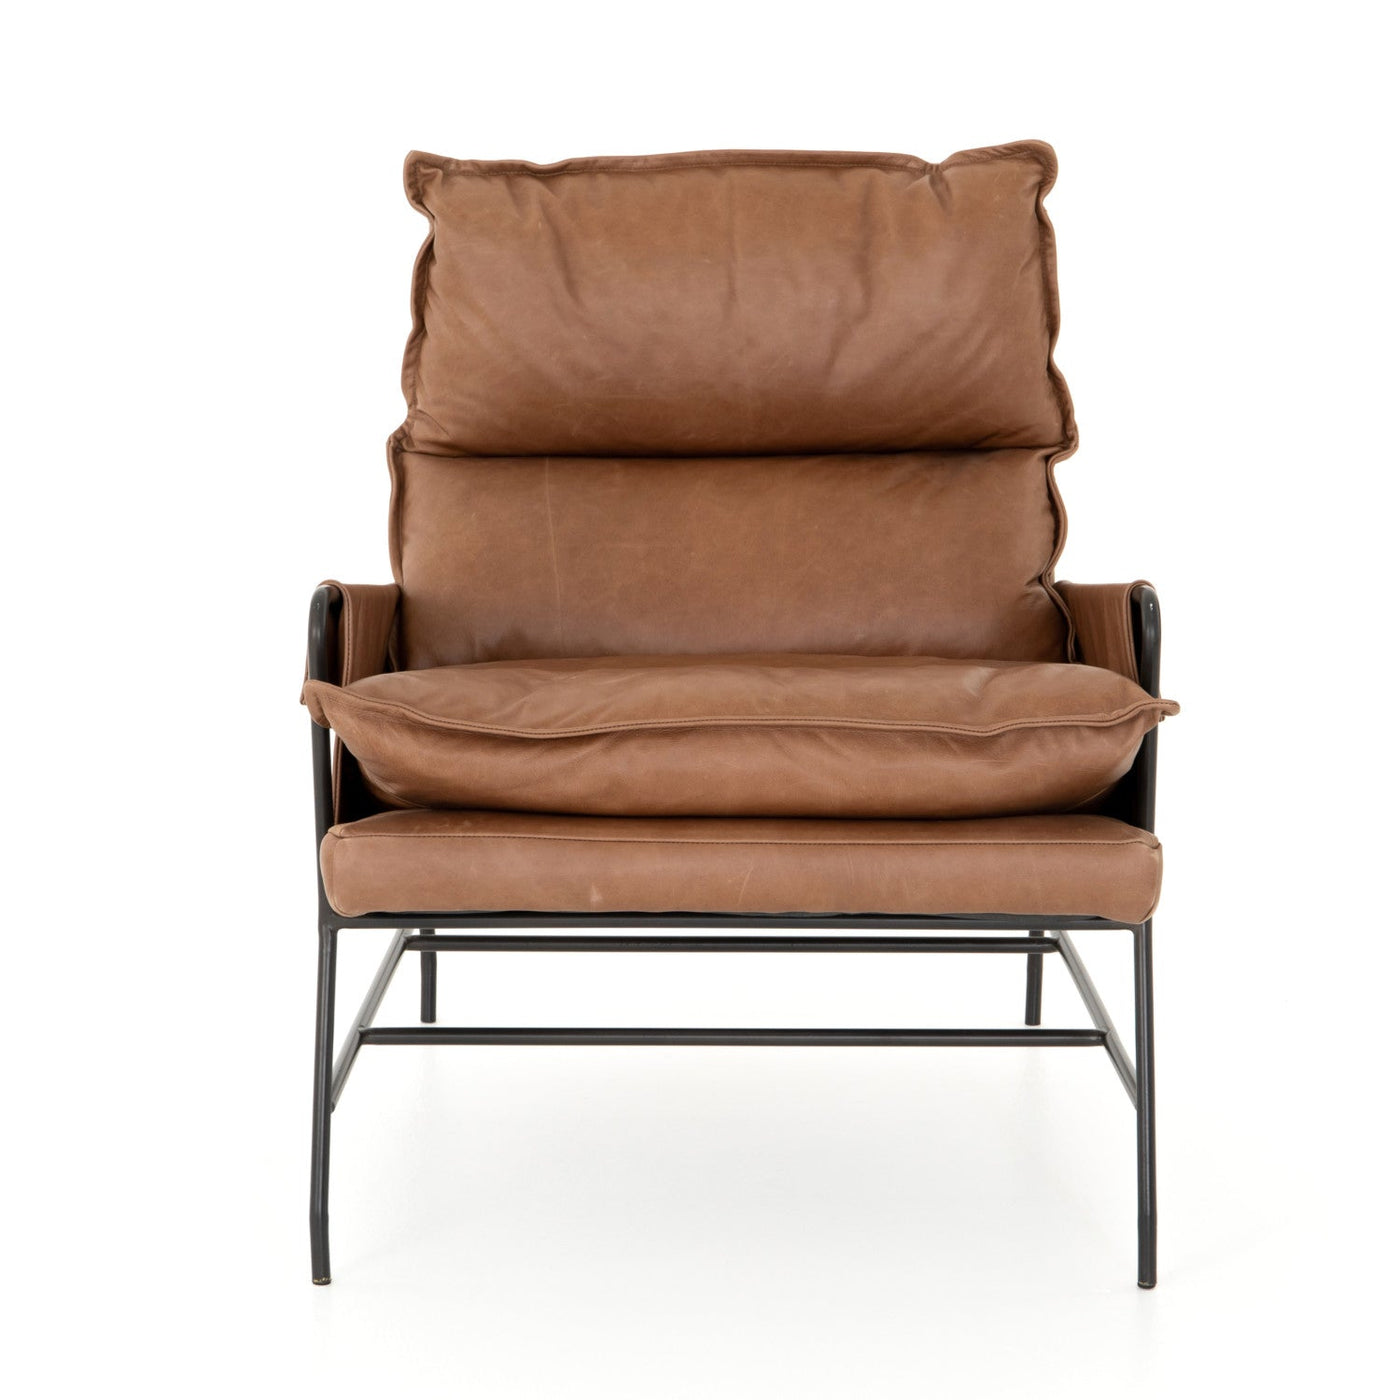 Tanner Leather Chair- Cognac